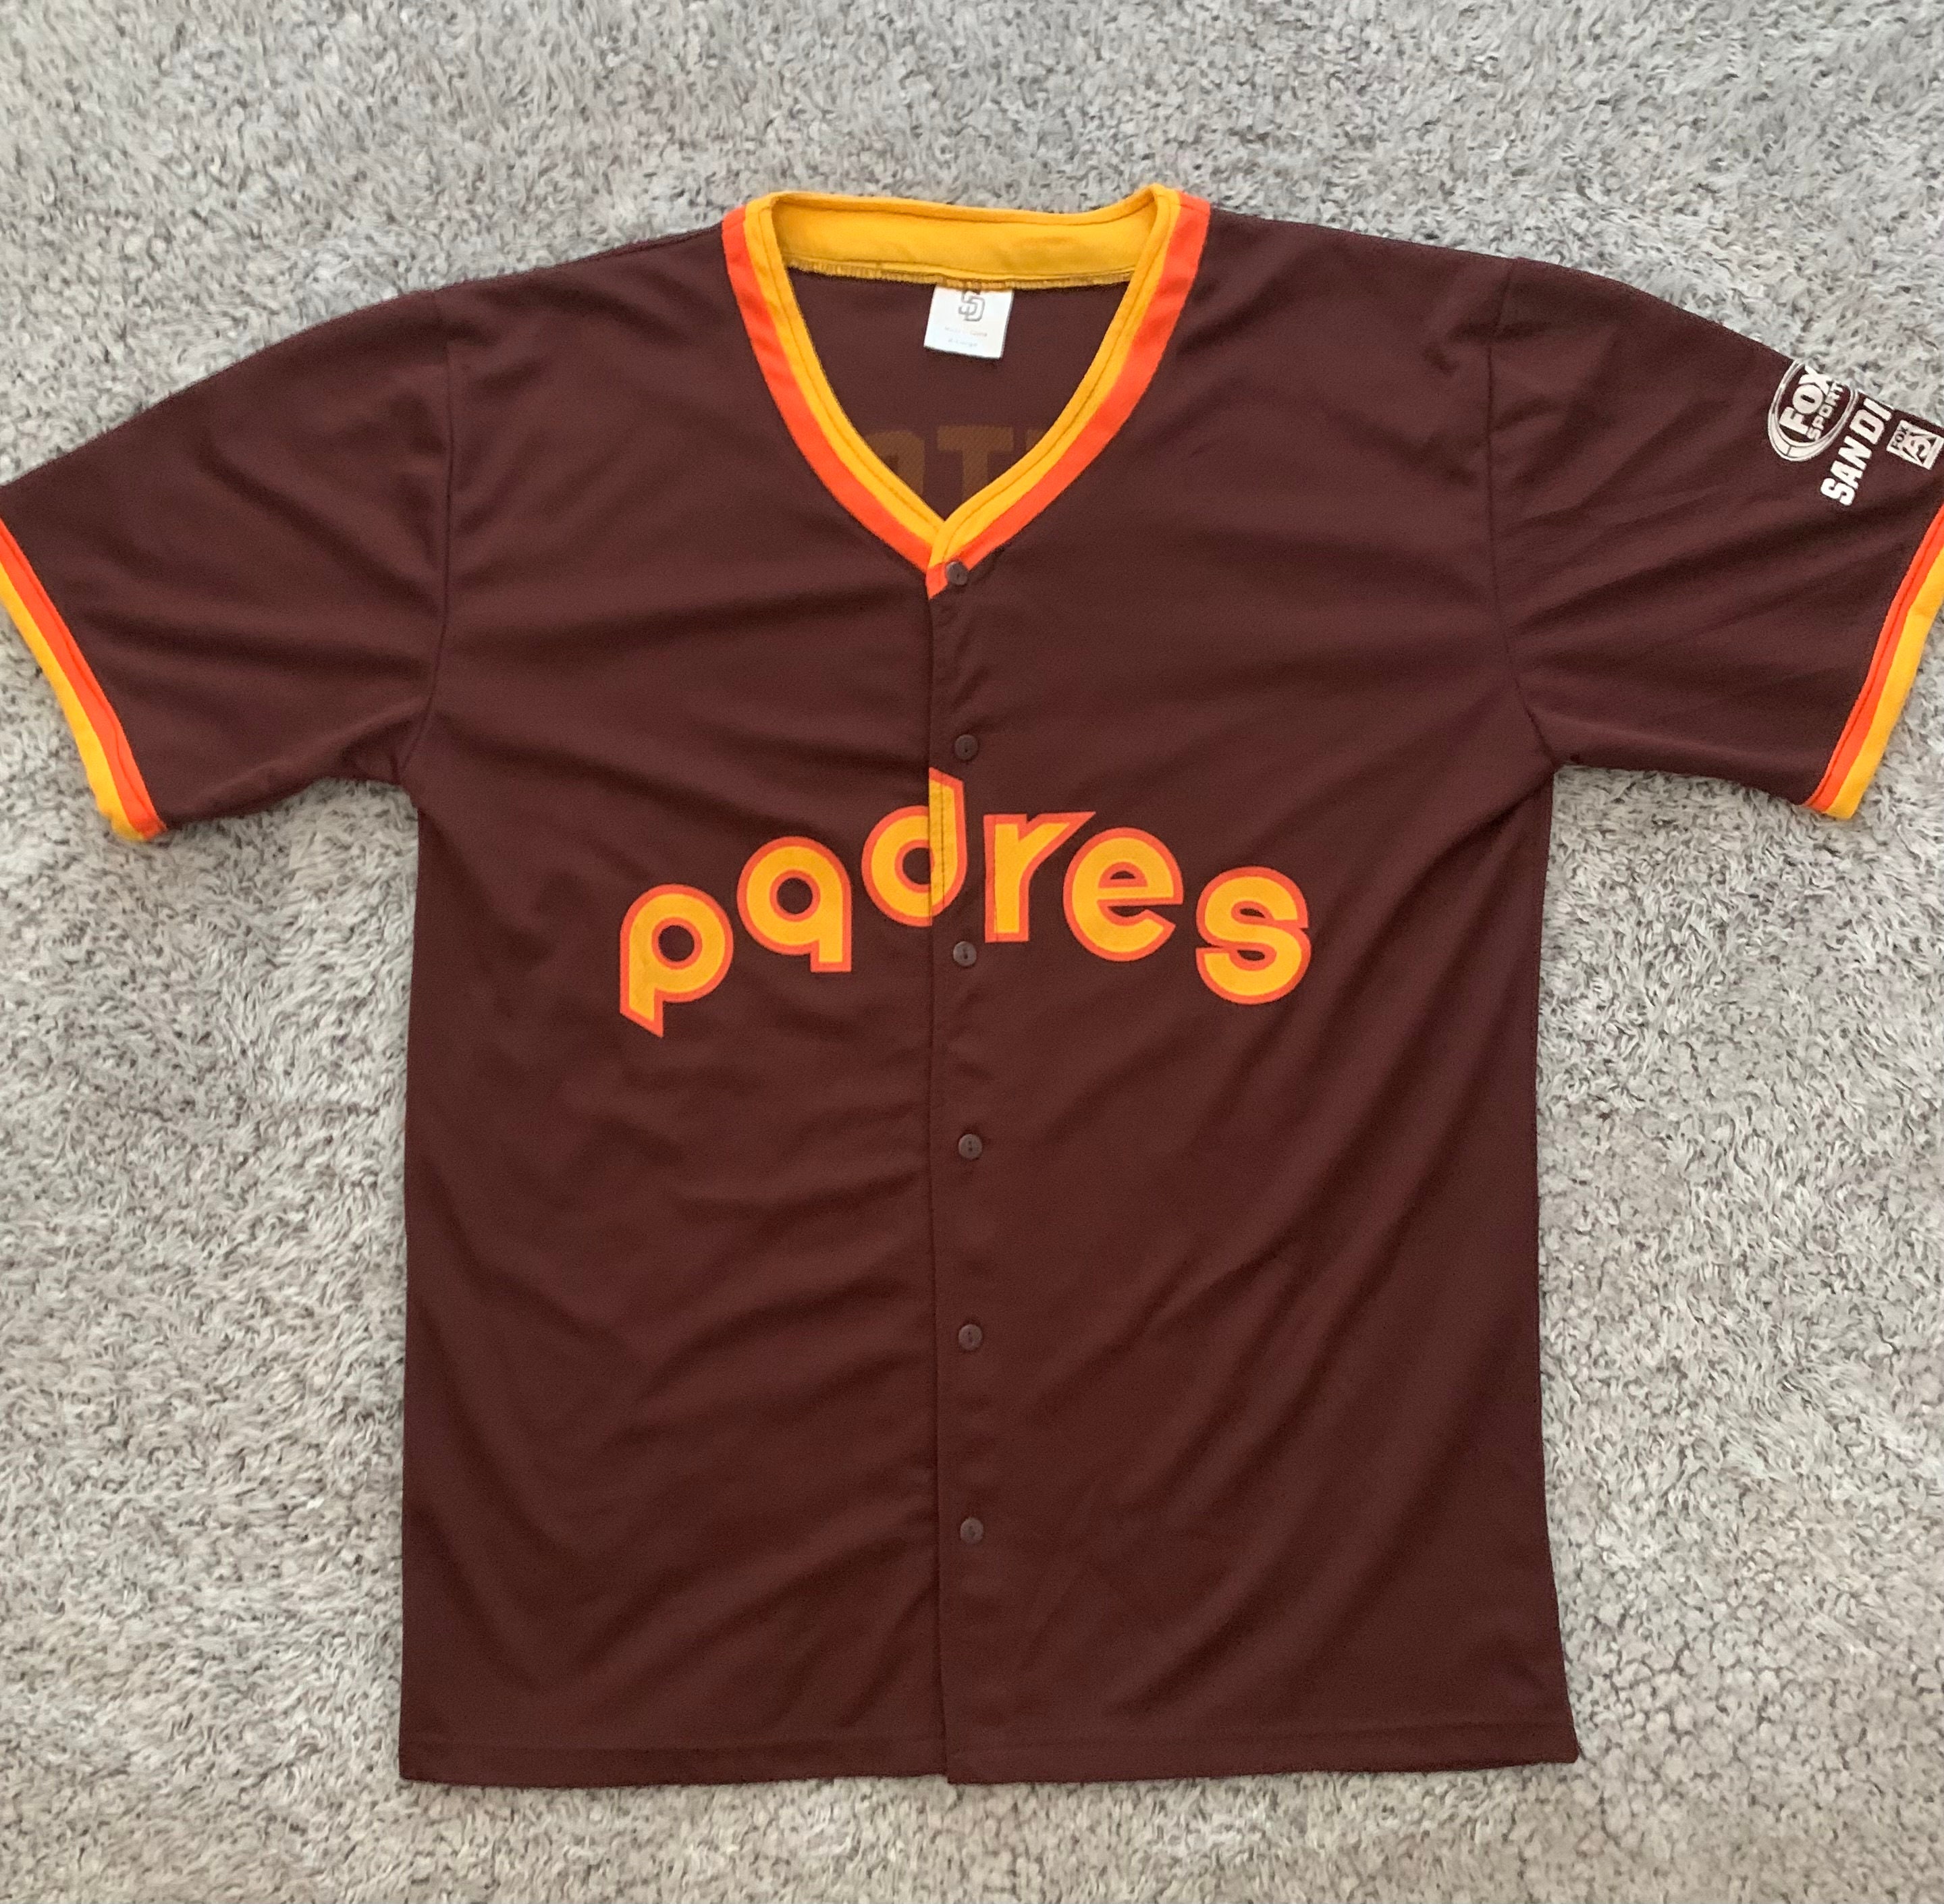 Vintage San Diego Padres Ed Whitson Promotional Jersey. XL. 